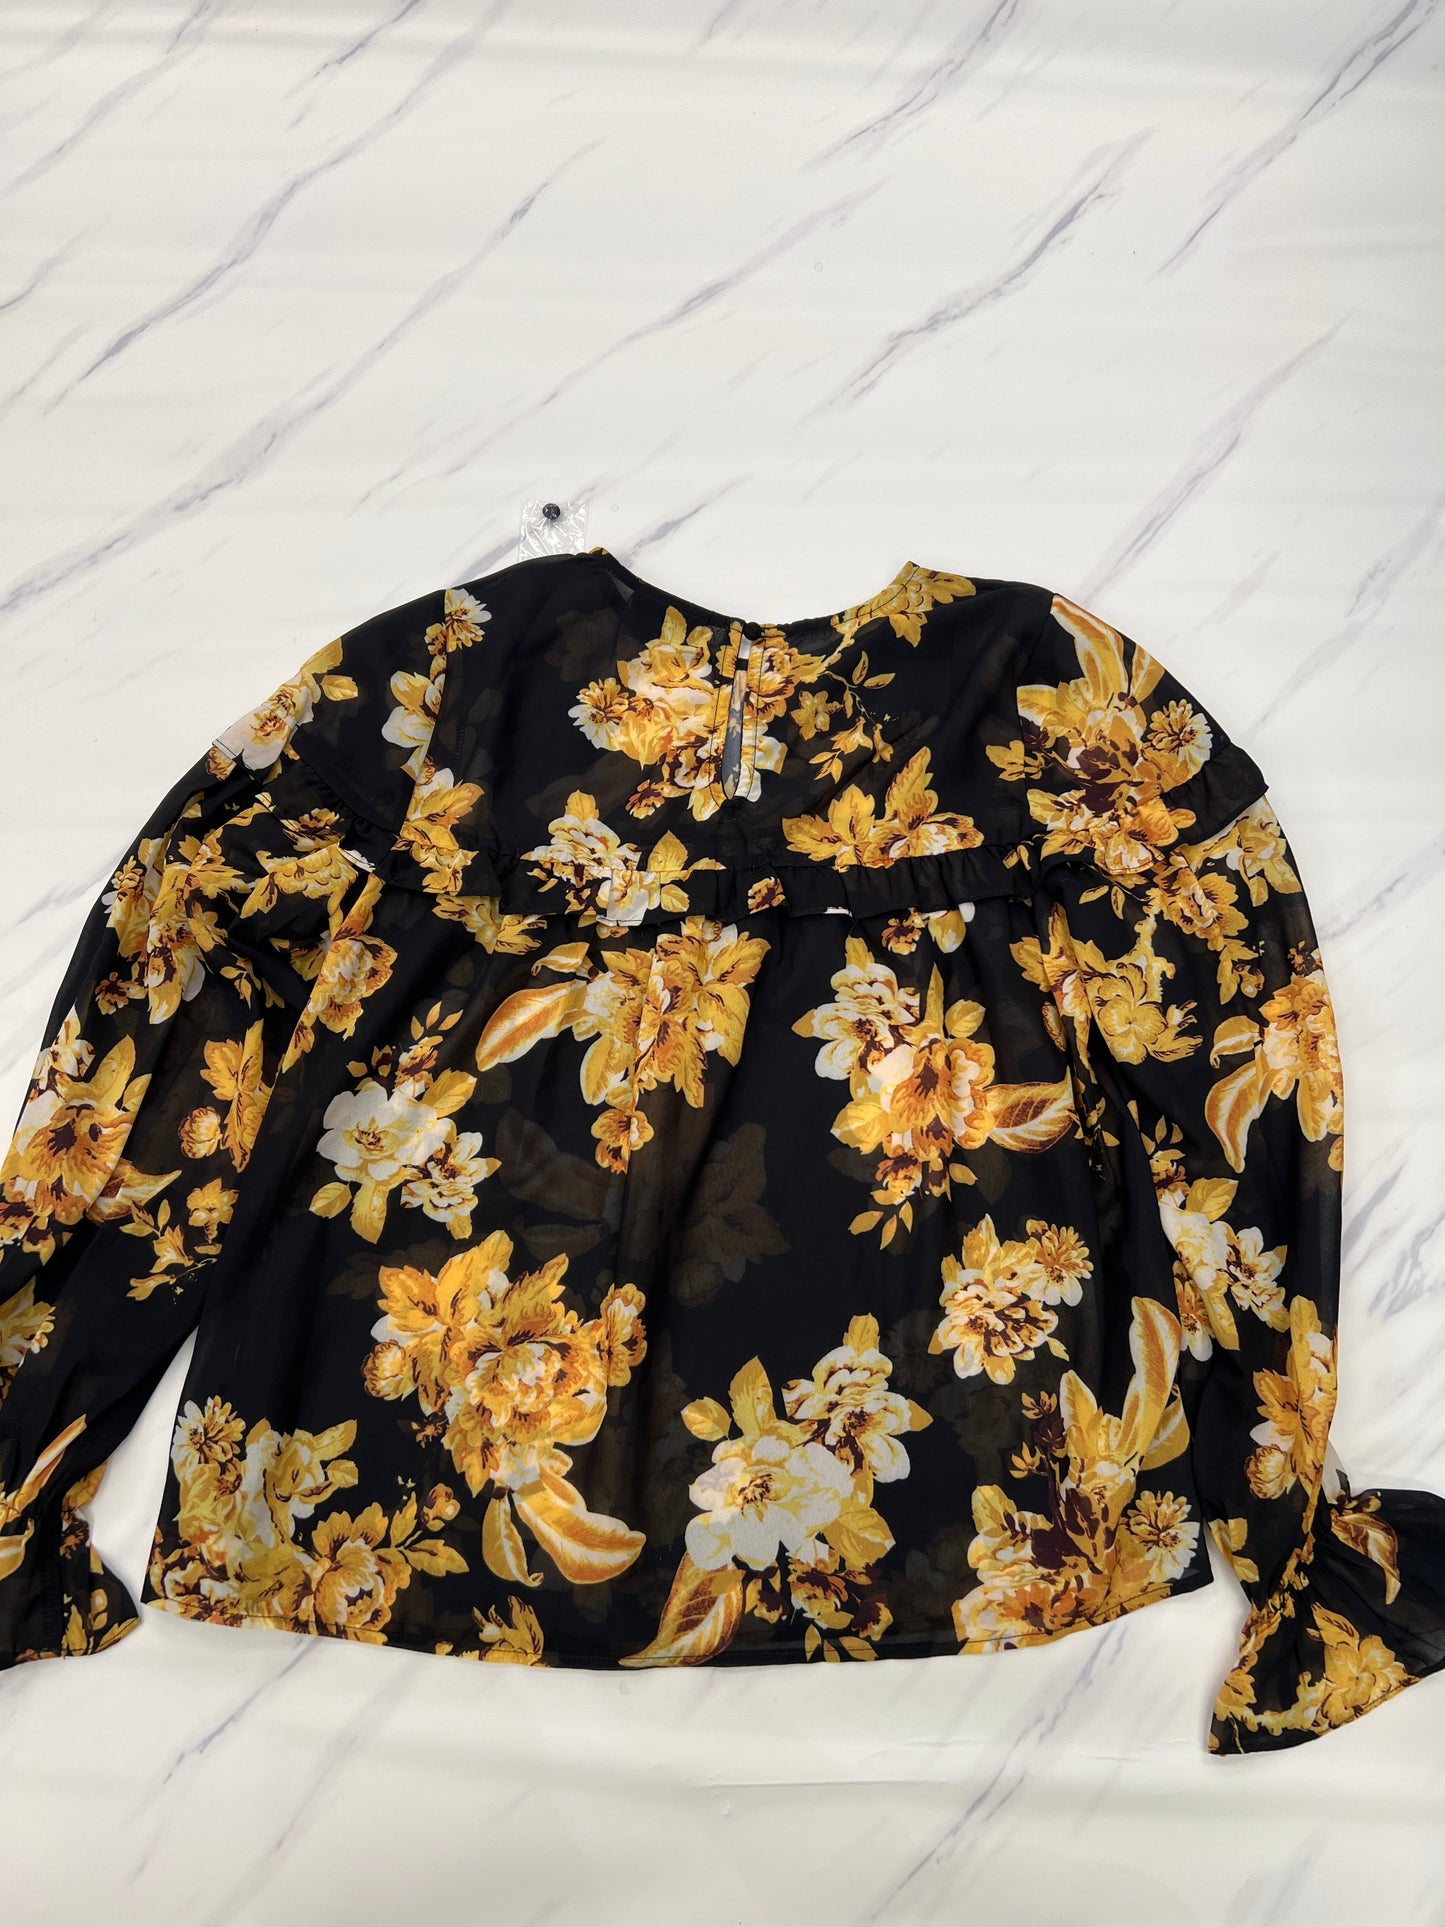 Floral Print Top Long Sleeve Vici, Size S